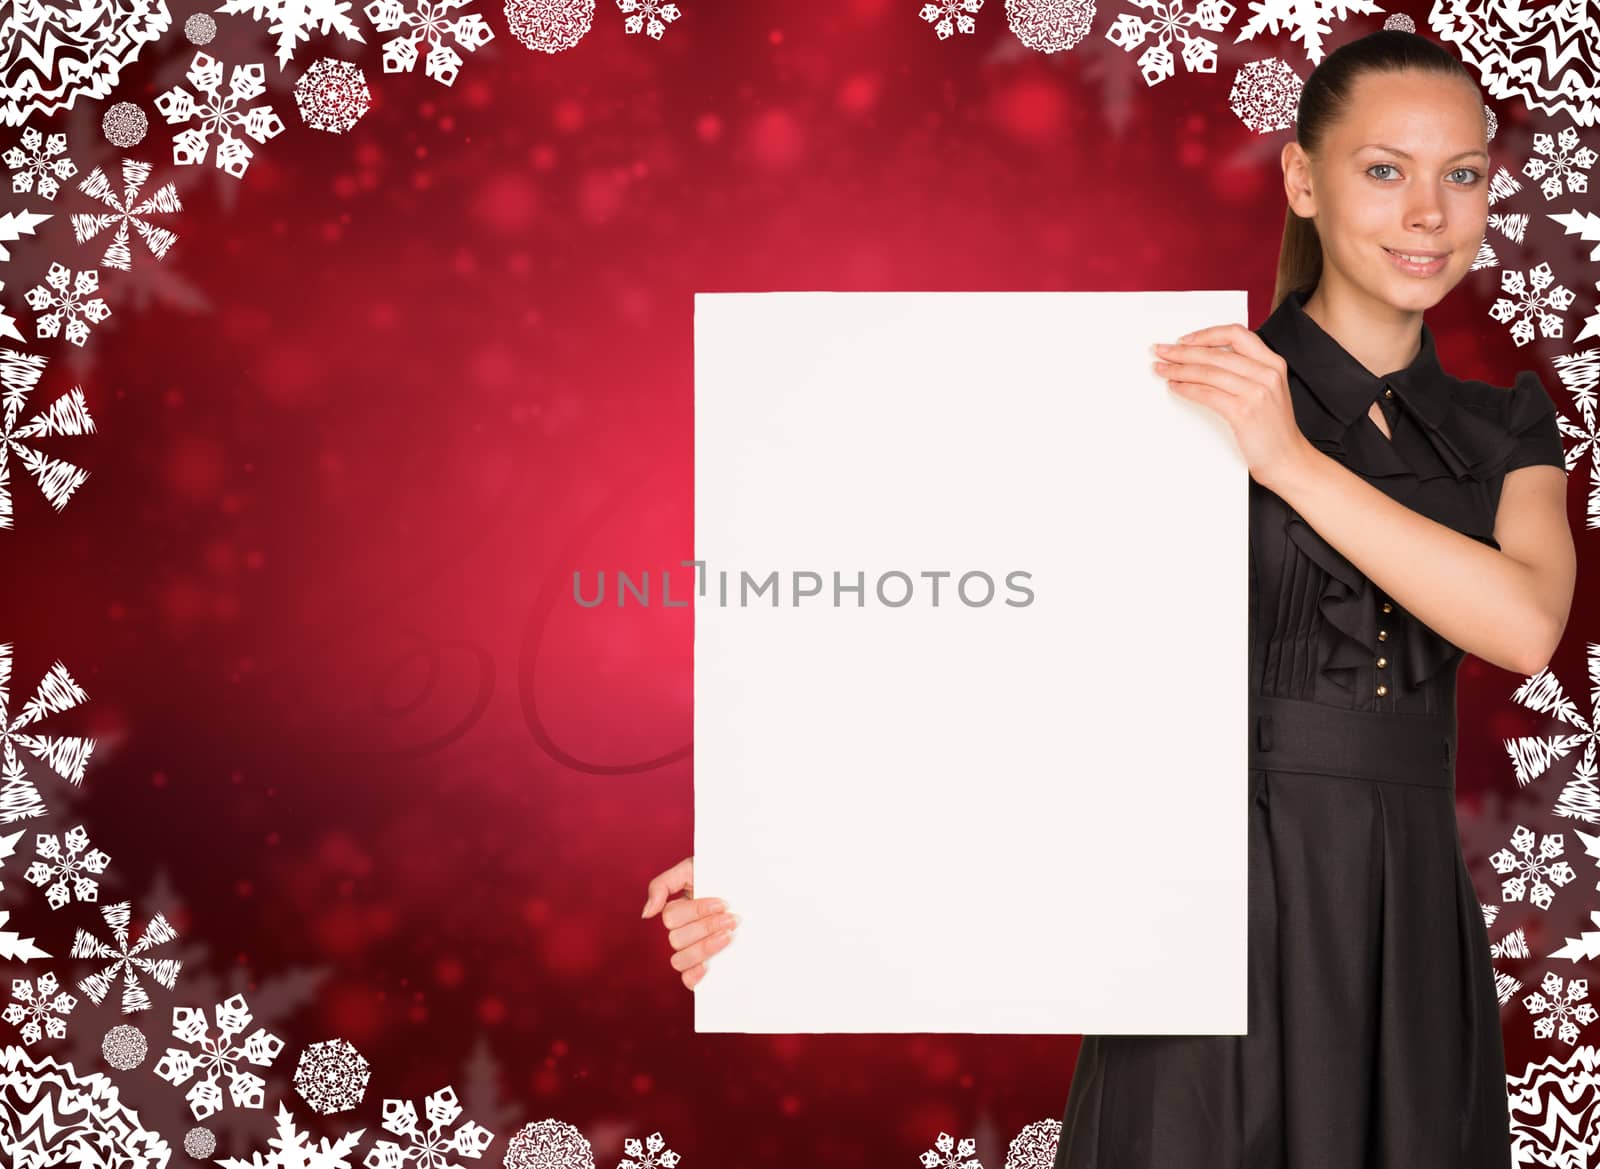 Businesswoman holding empty paper. Abstract christmas backgrond